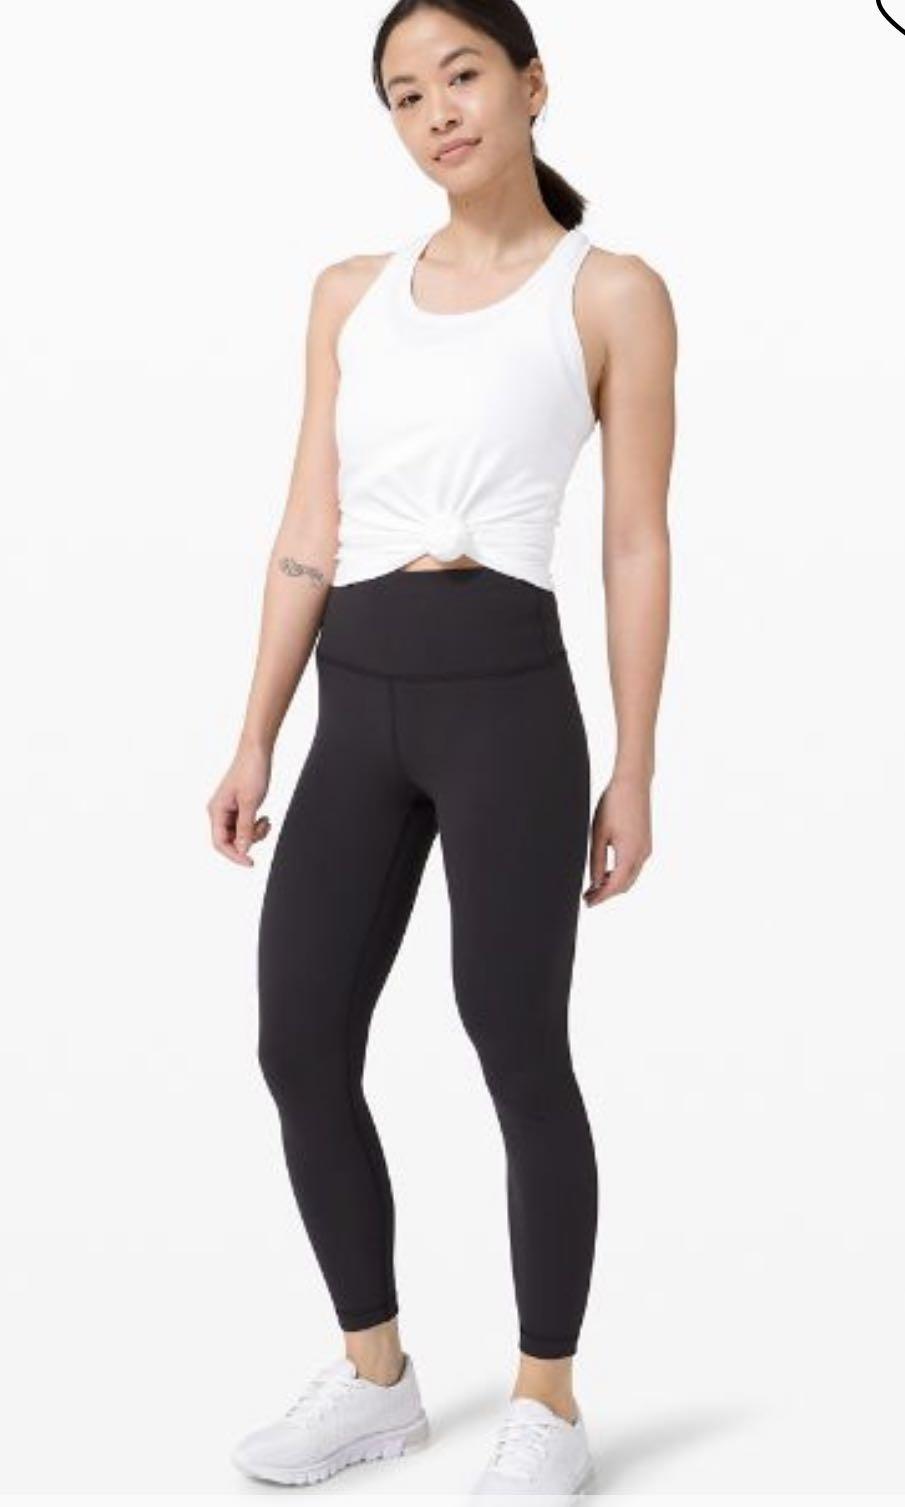 Lululemon Wunder Train High-Rise Tight 24” Asia Fit in Black